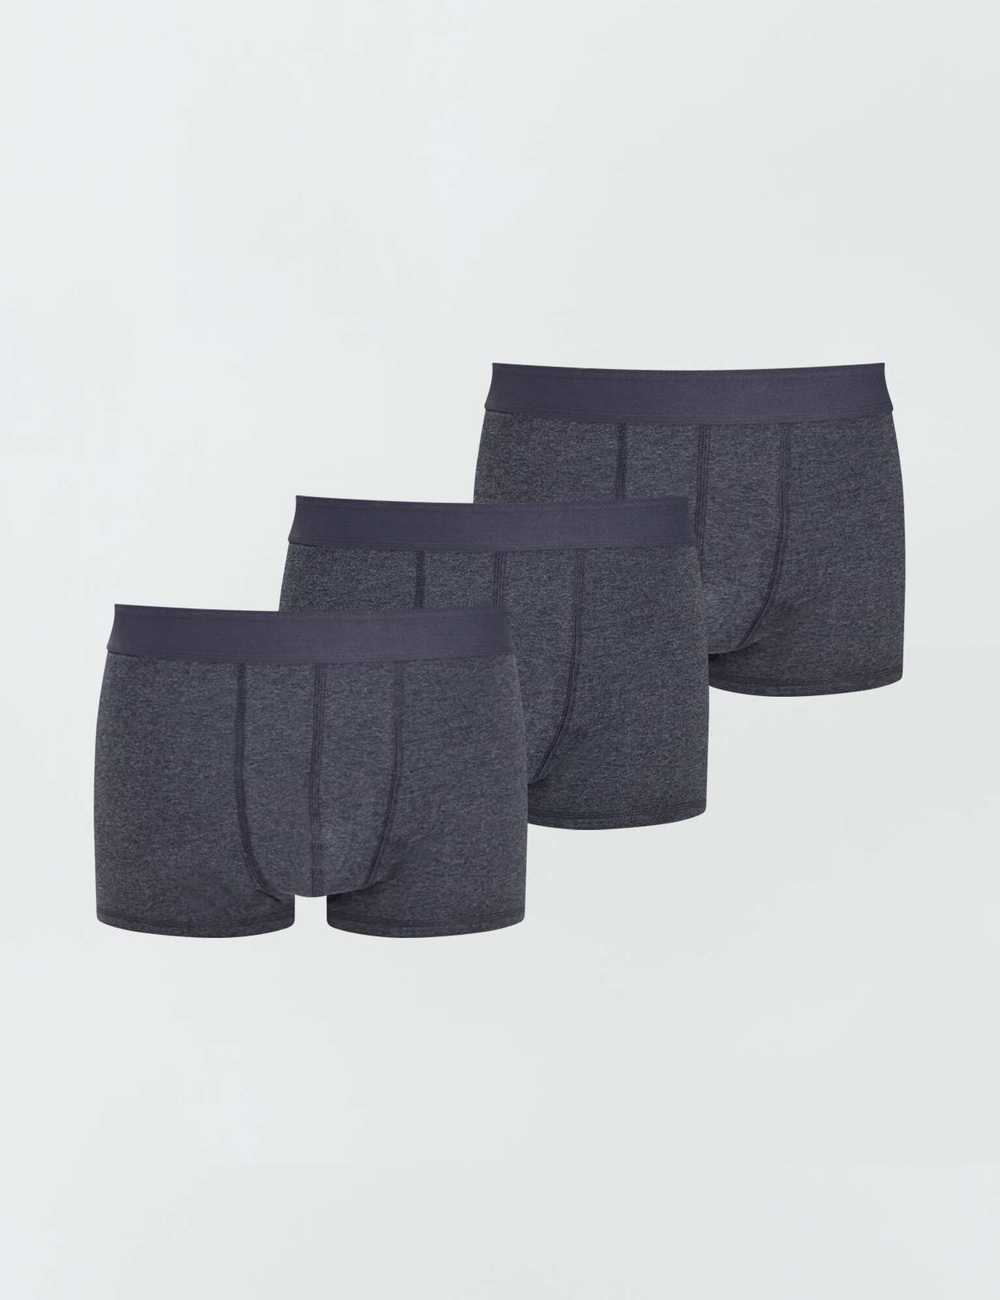 Buy Pack of 3 pairs of plus size eco-design boxer shorts Online in